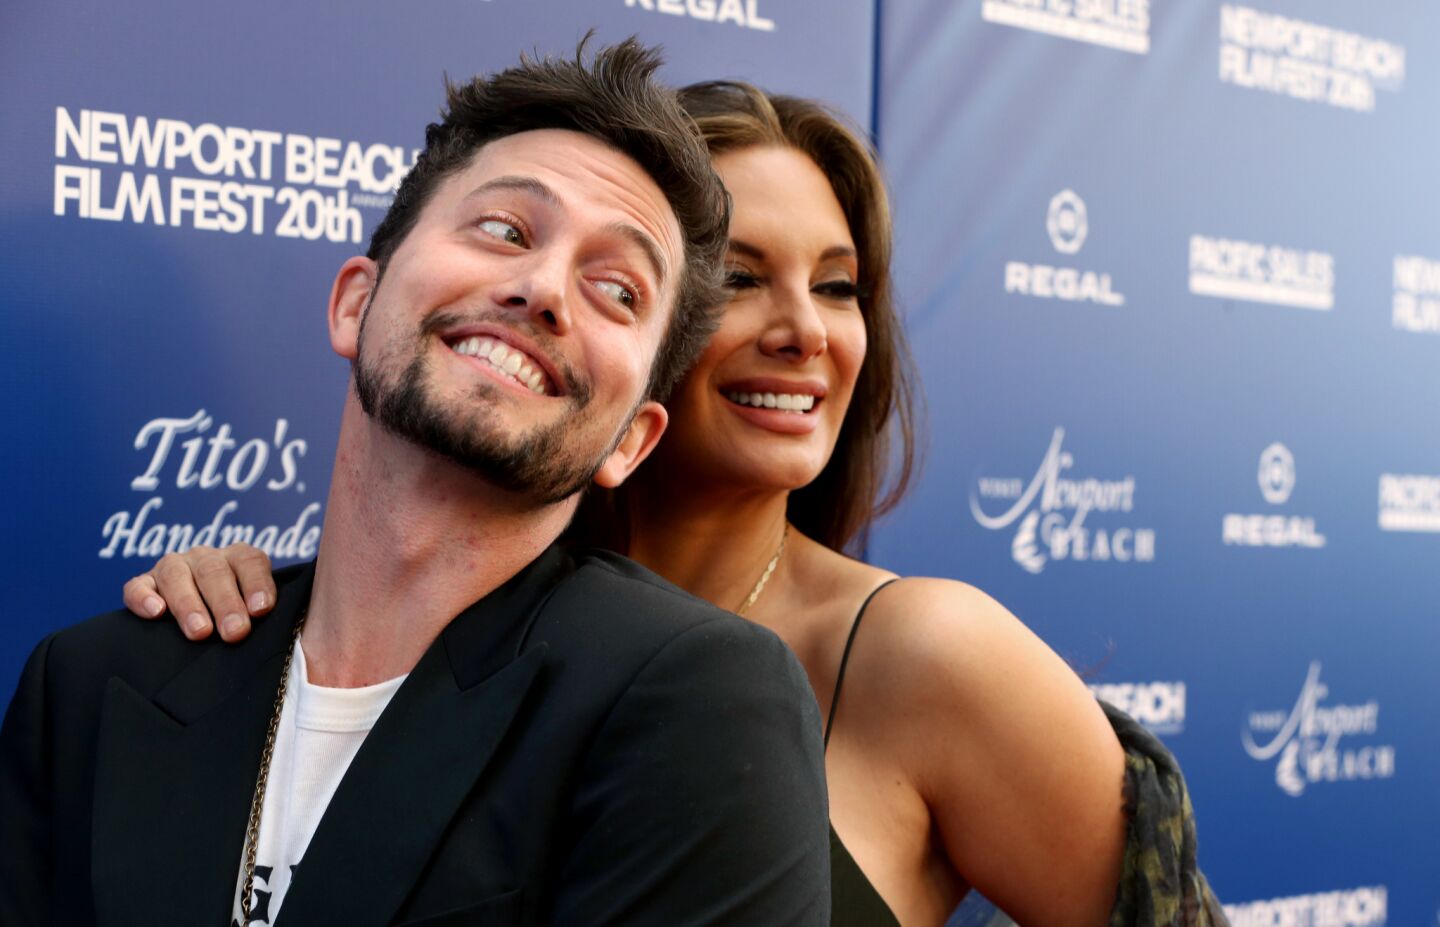 Jackson Rathbone and Alex Meneses pose for photographers at the Newport Beach Film Festival opening night Thursday.